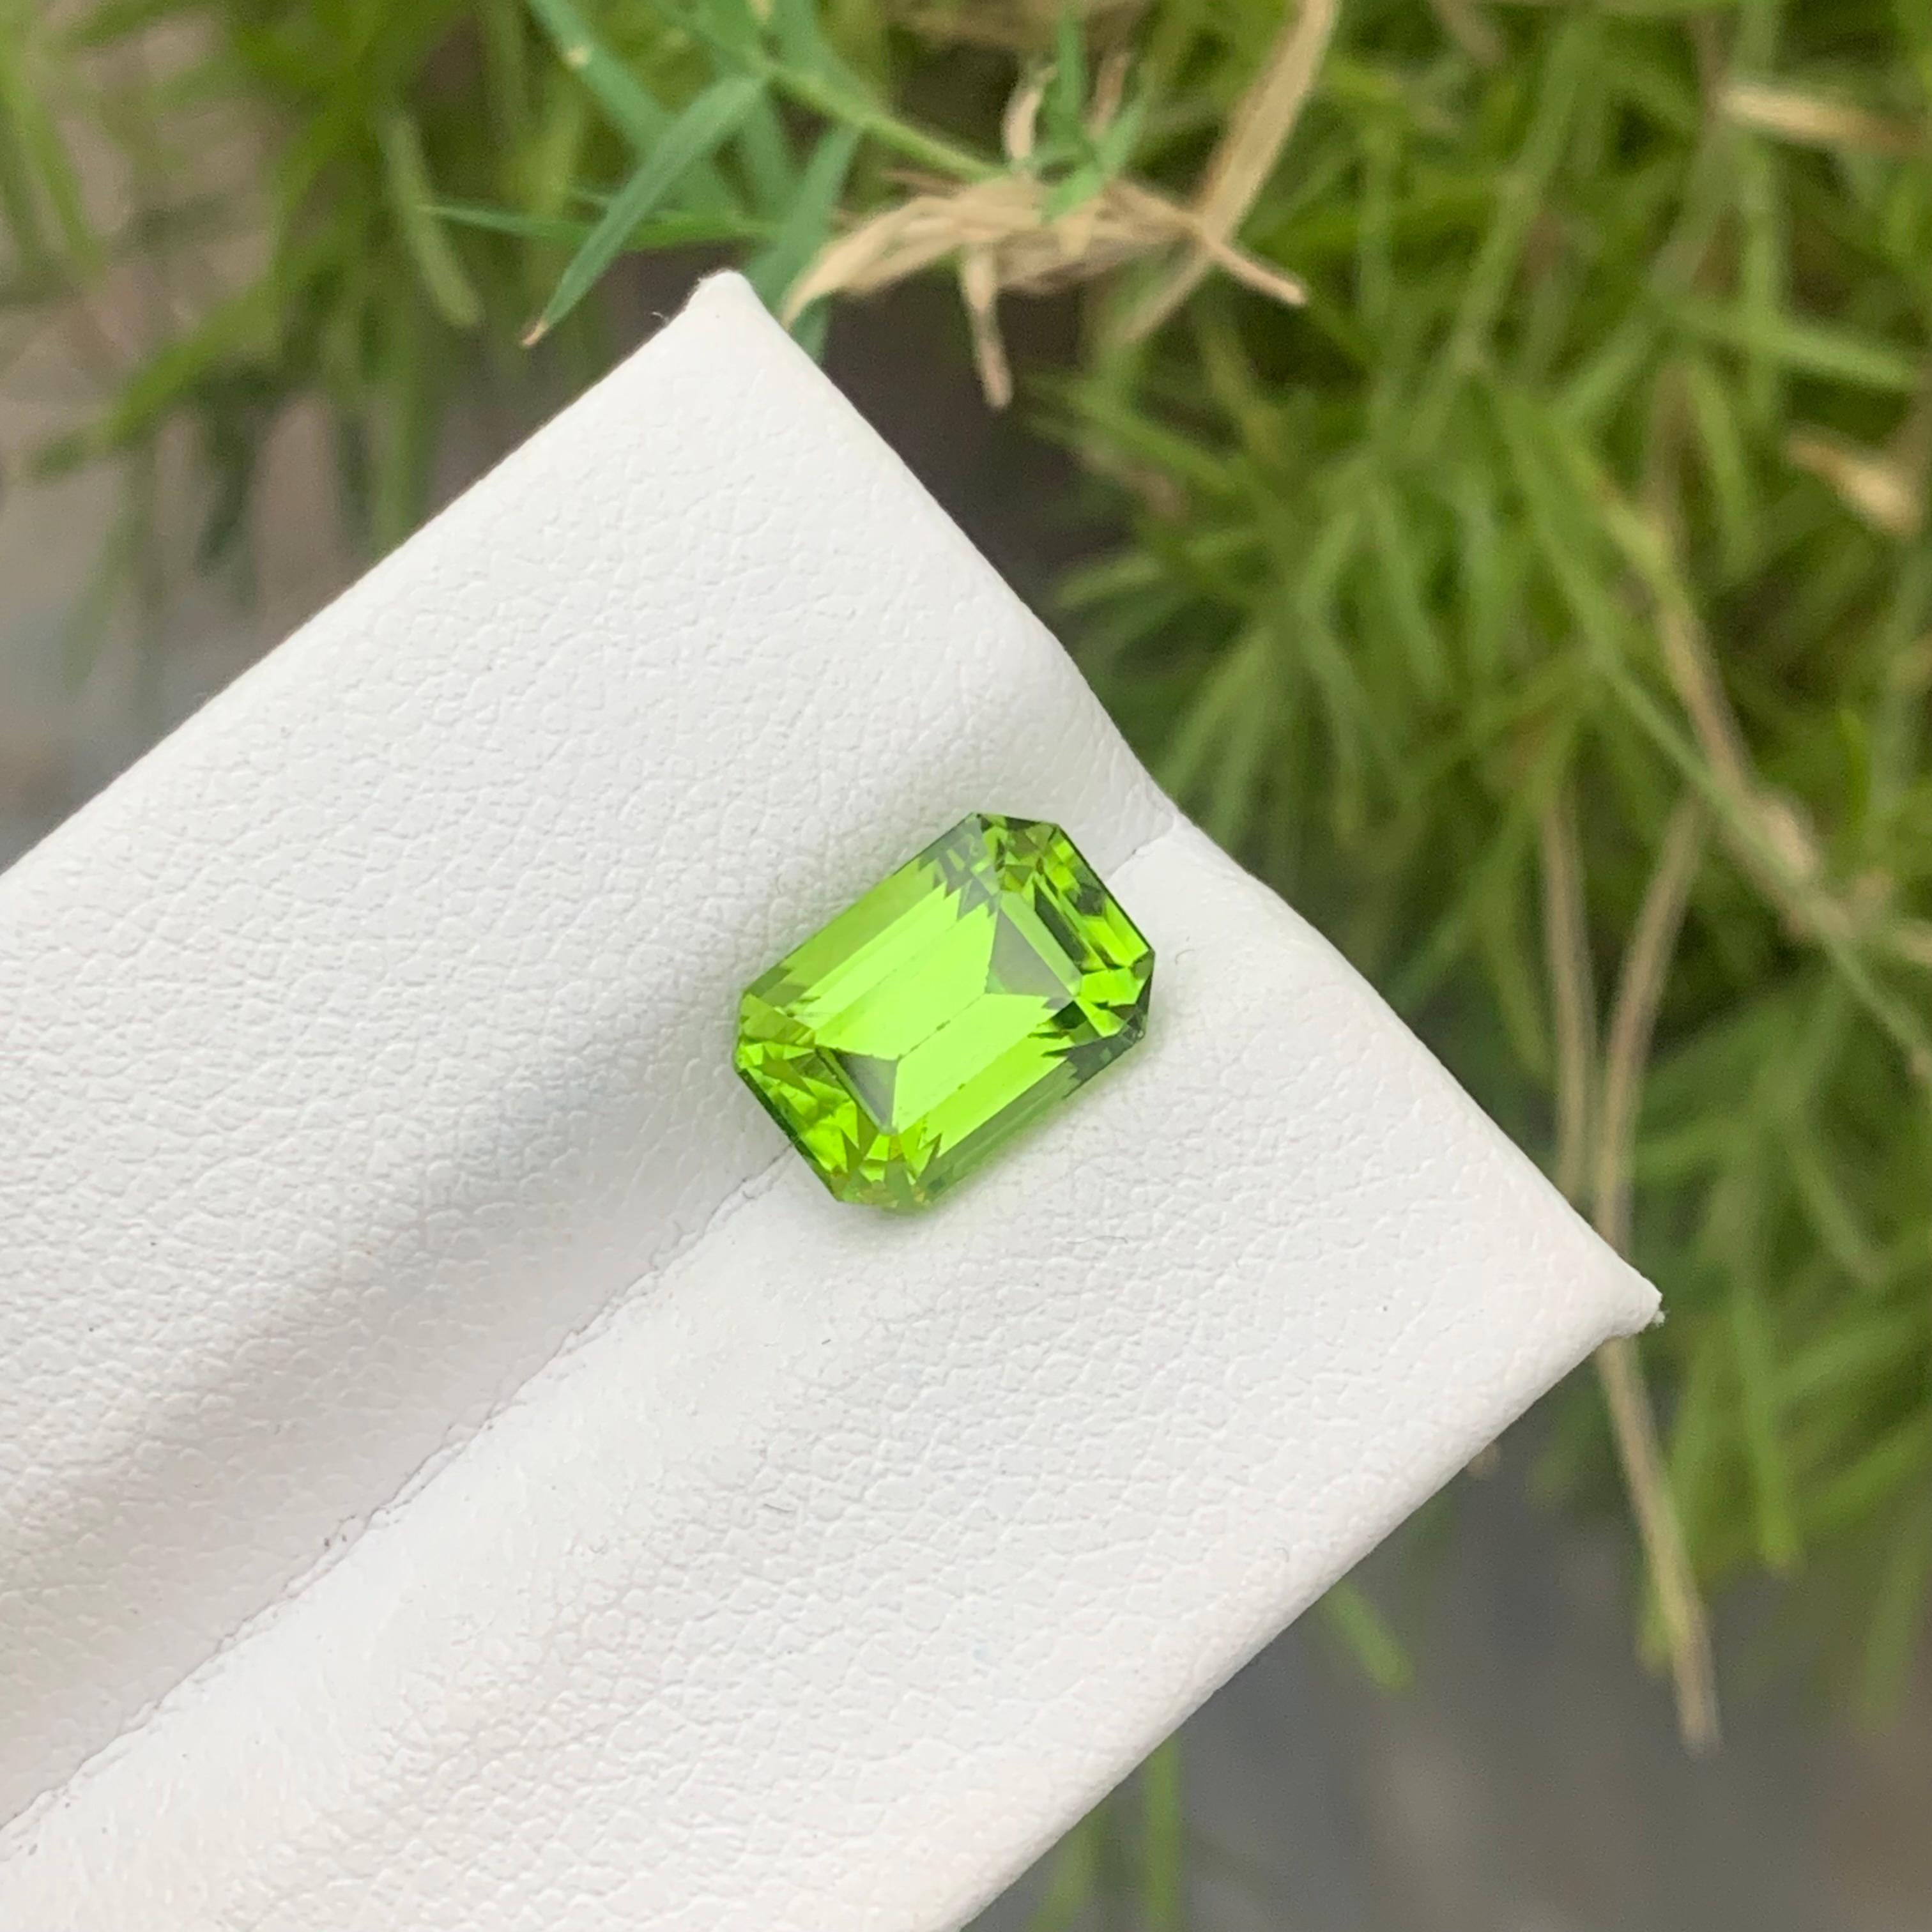 Gorgeous 3.35 Carat Natural Loose Green Peridot Gemstone from Pakistani Mine For Sale 2